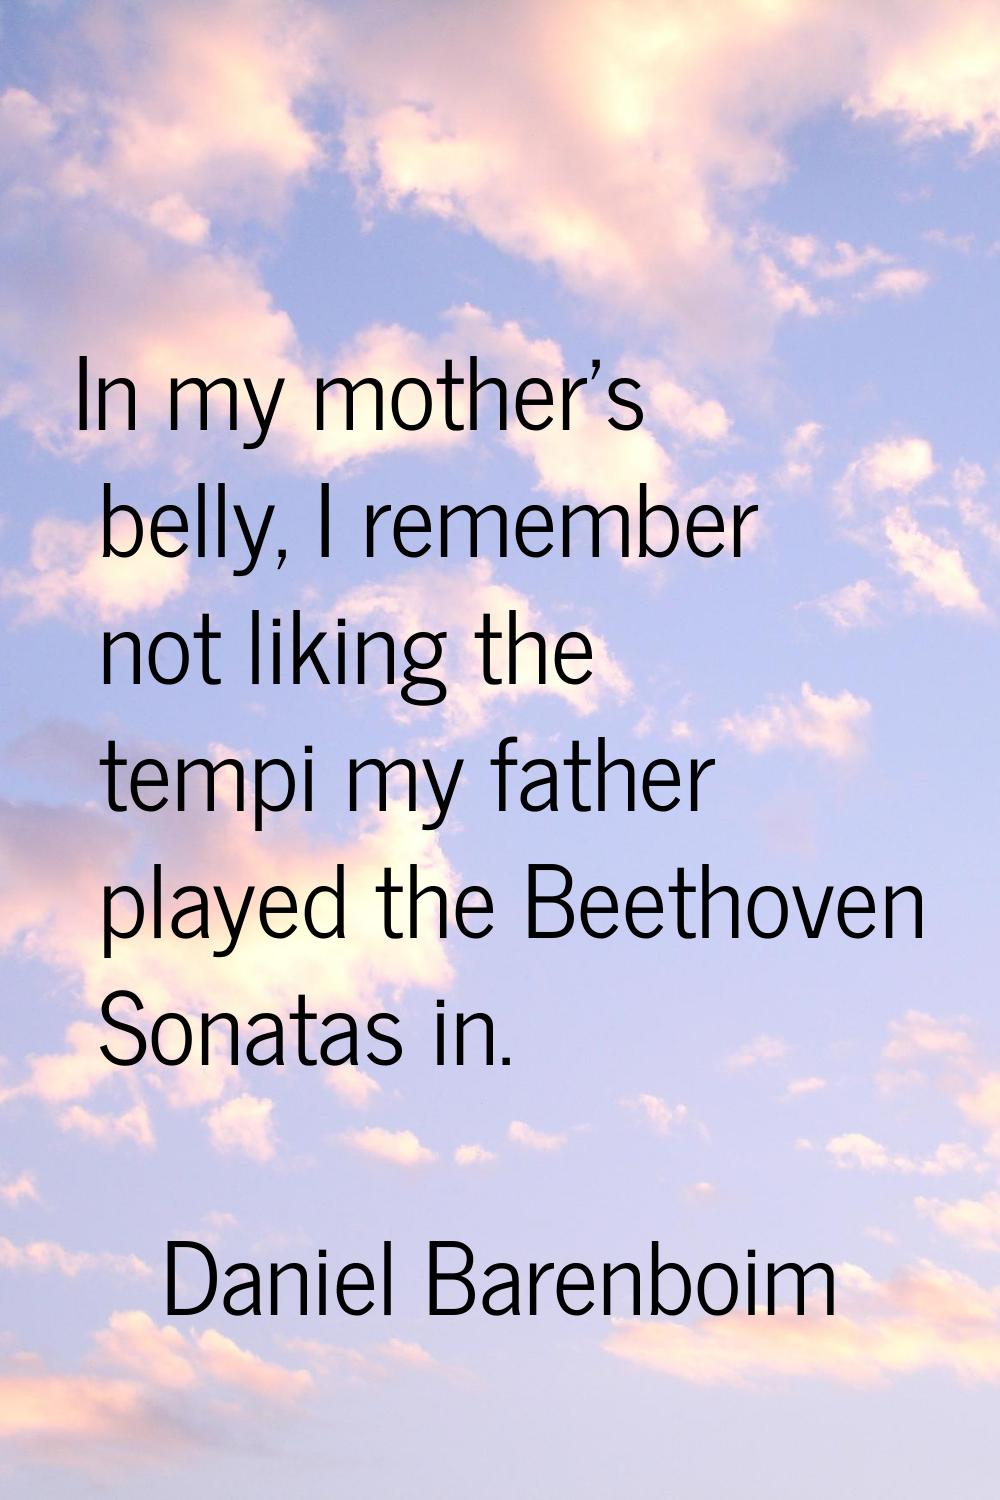 In my mother's belly, I remember not liking the tempi my father played the Beethoven Sonatas in.